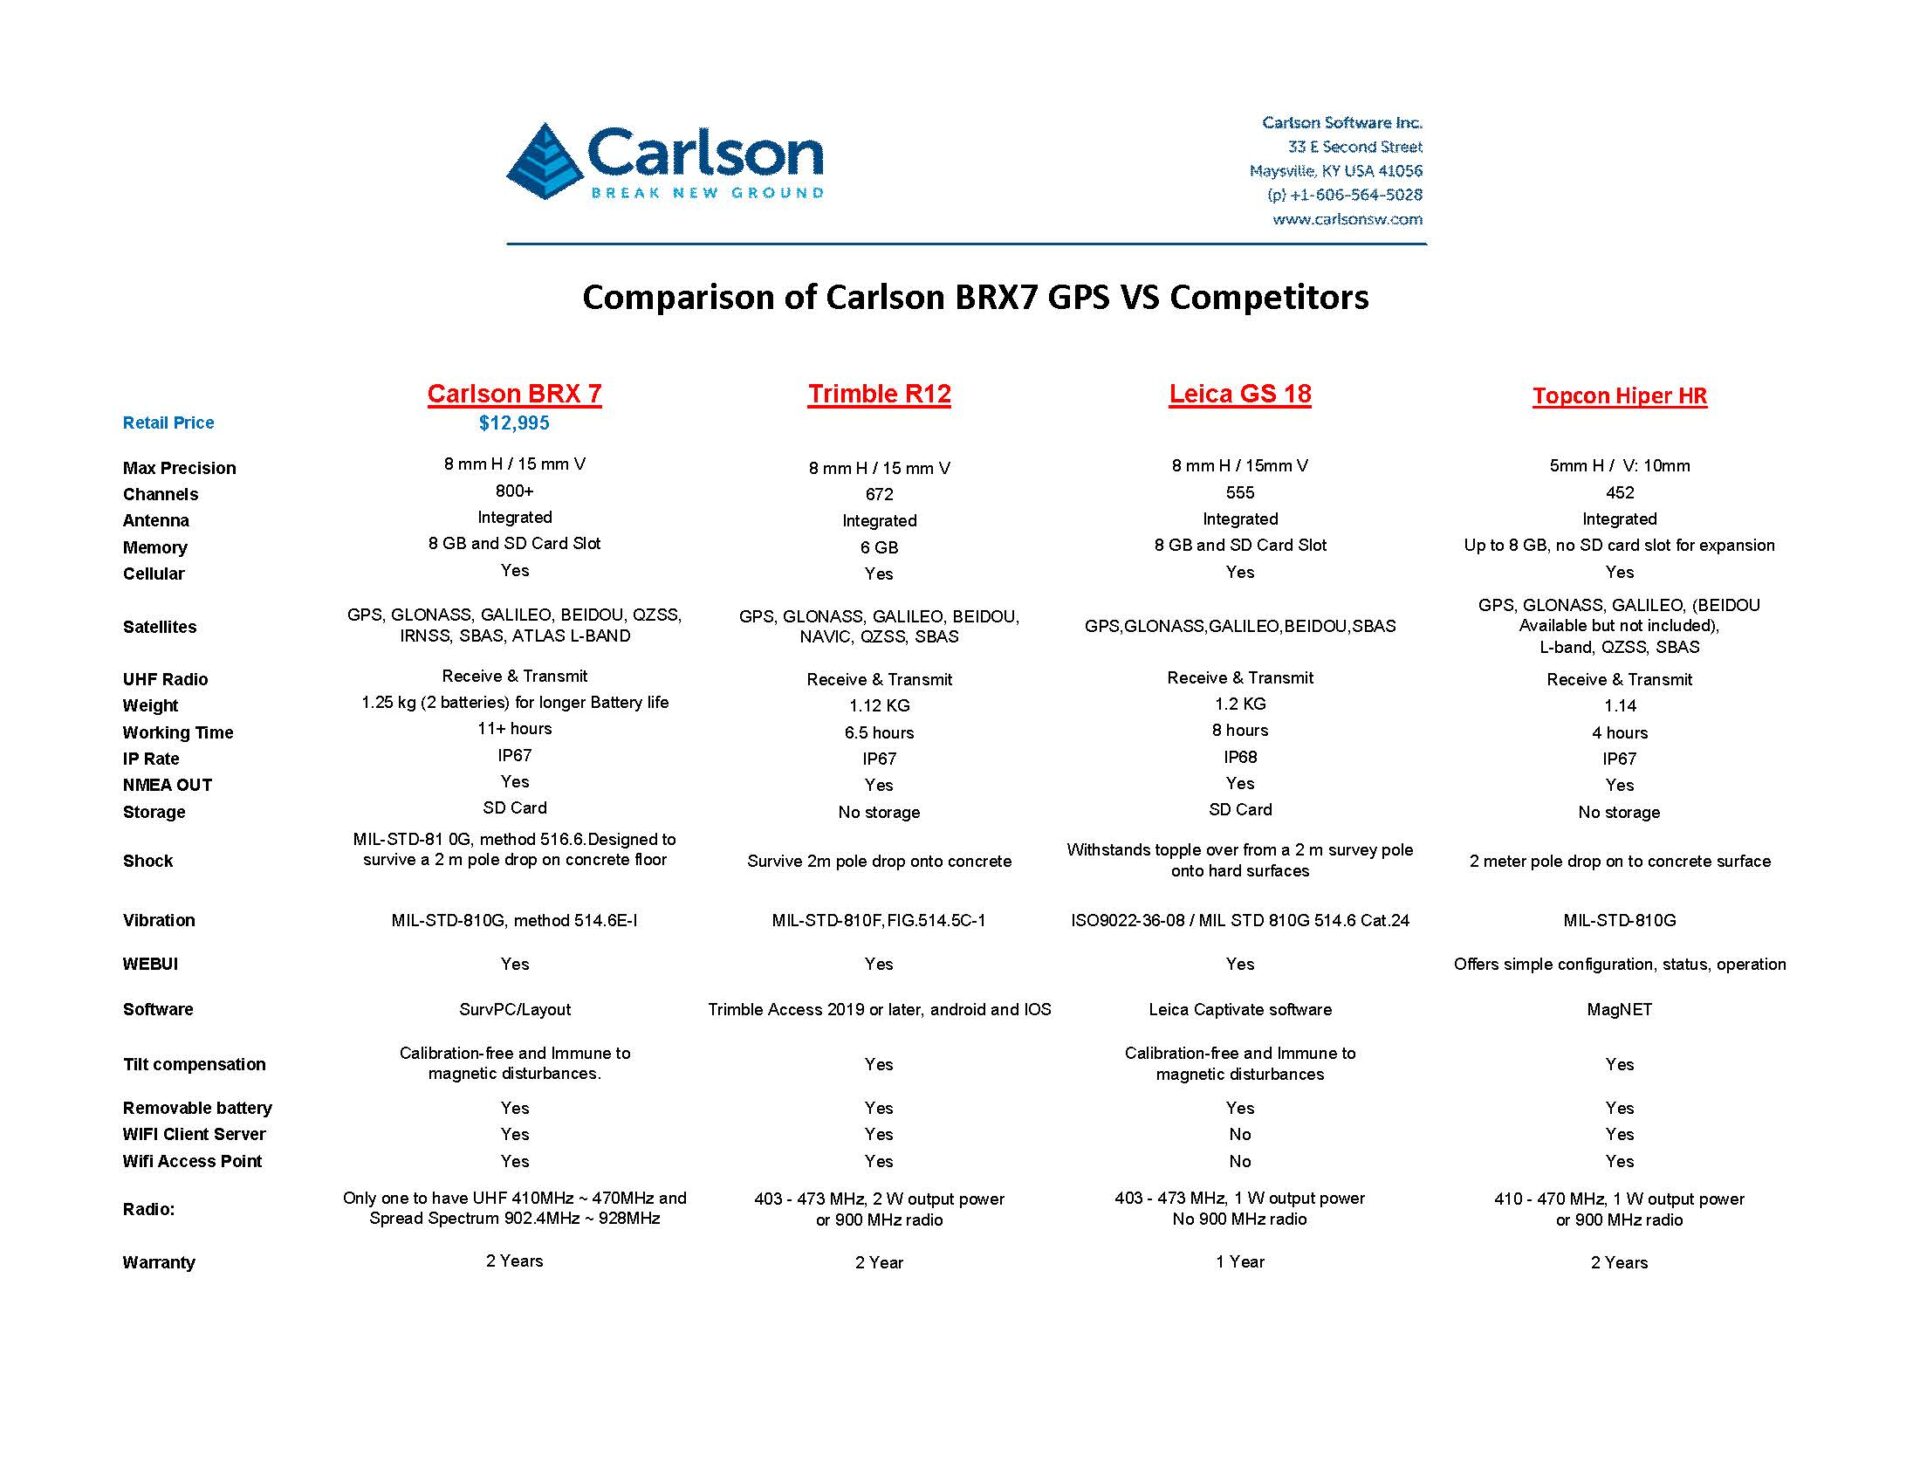 Revised Carlson BRX7 VS Competitors_Page_1